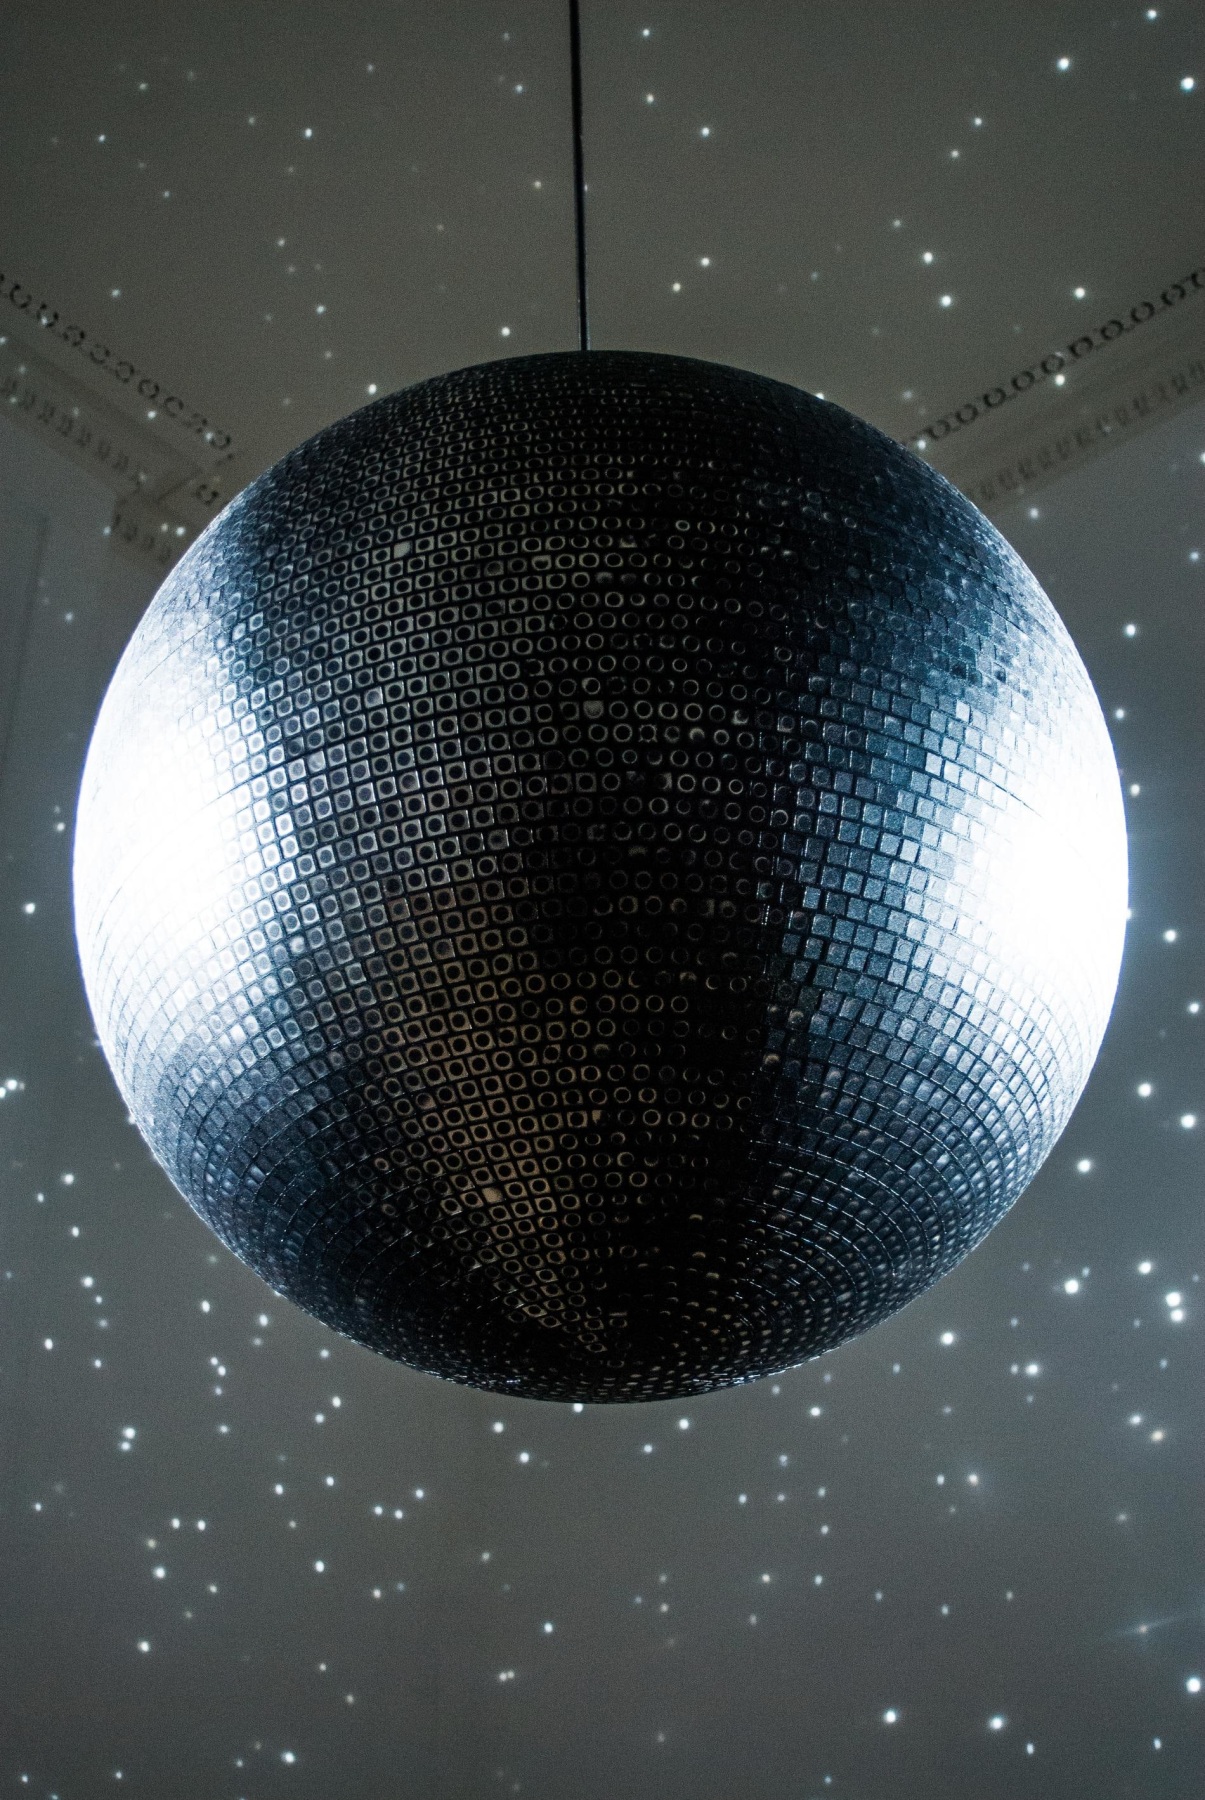 image of a disco ball lighting up a dark room with specks of light